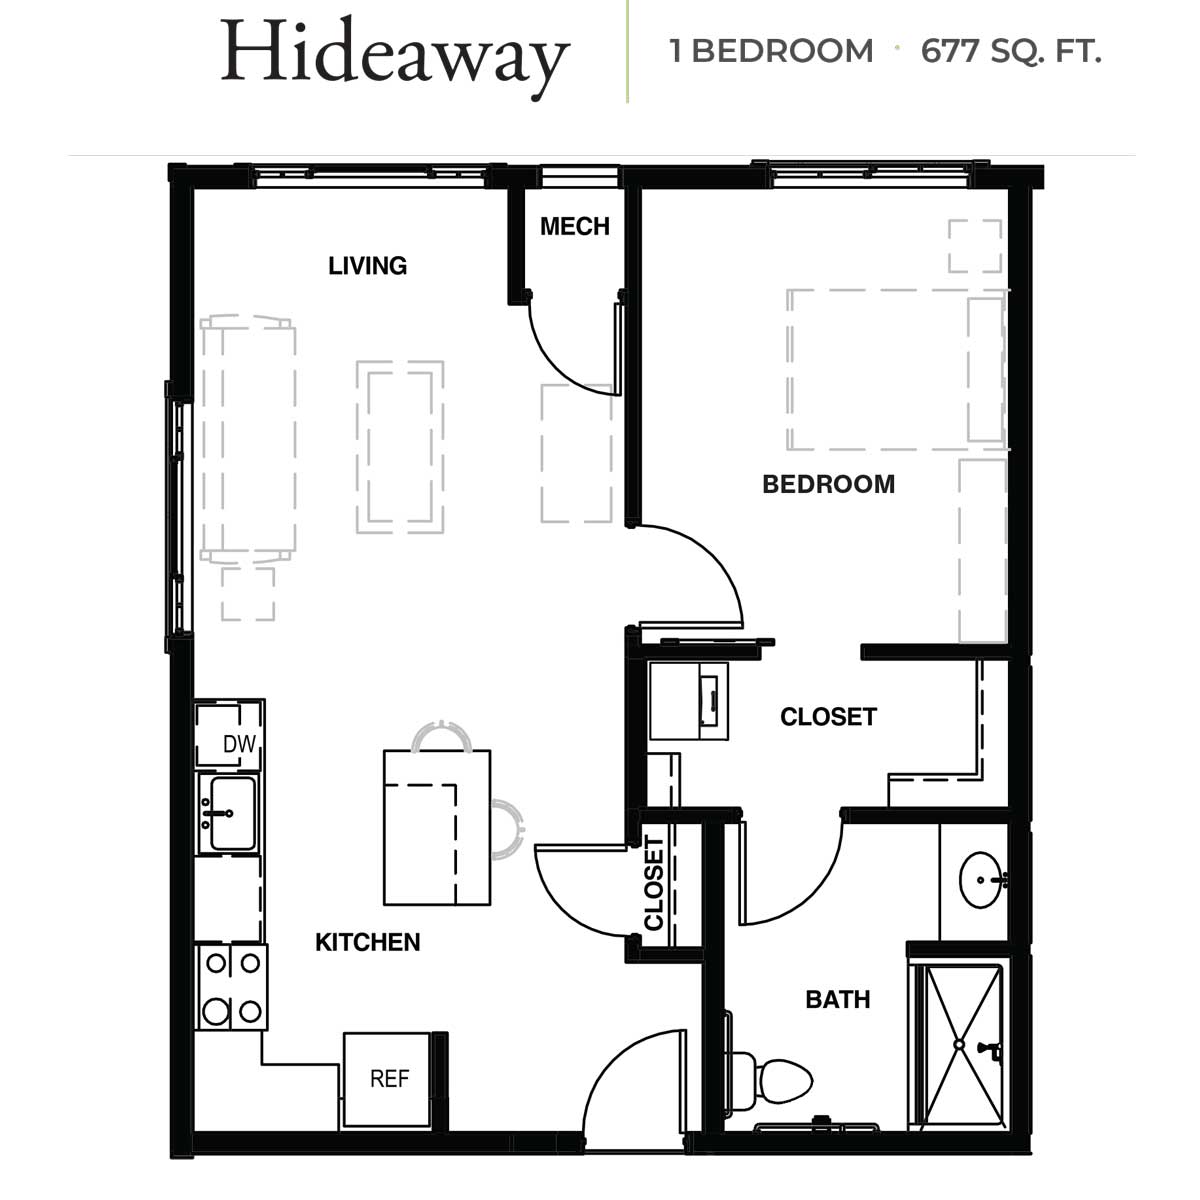 Floor plan of a one-bedroom apartment layout named Hideaway, covering a total area of 677 square feet.